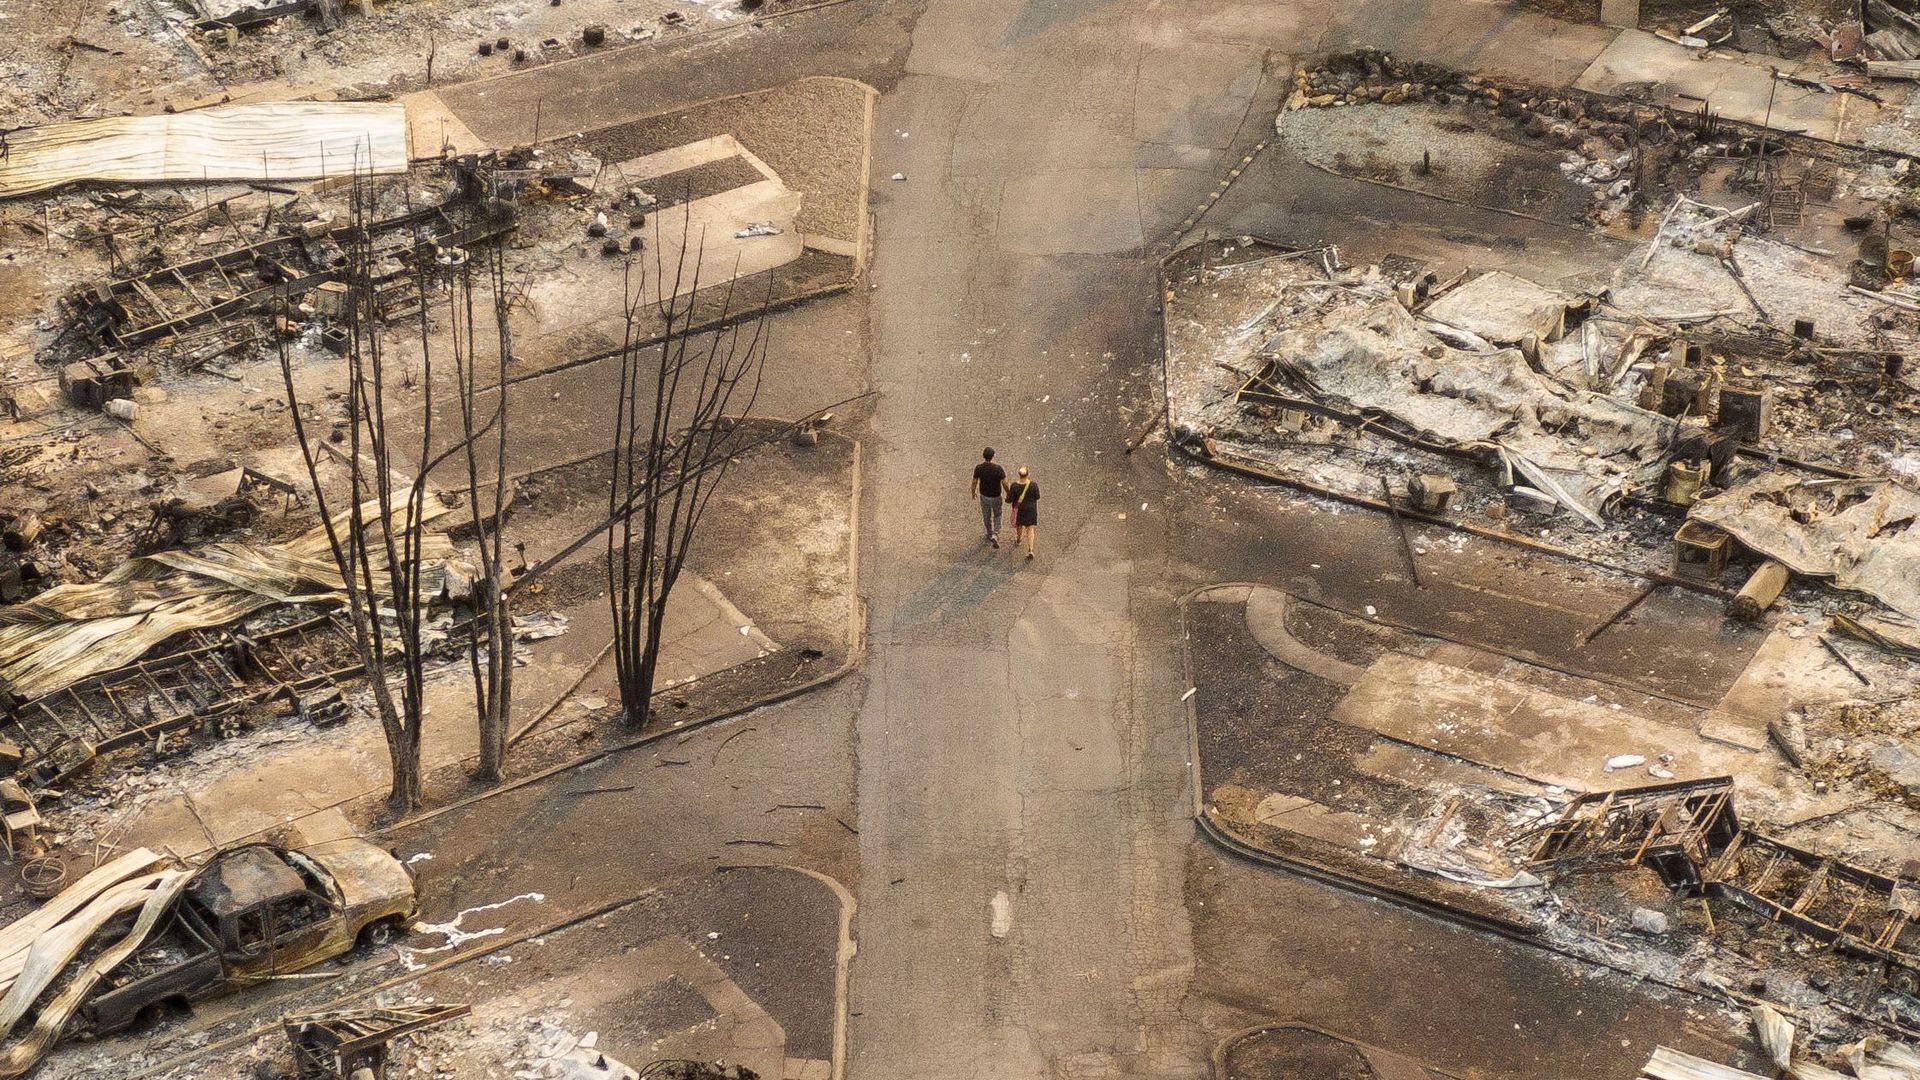 Drone's-eye view: Two people hold hands while walking through a mobile home park destroyed by fire Thursday in Phoenix, Ore.